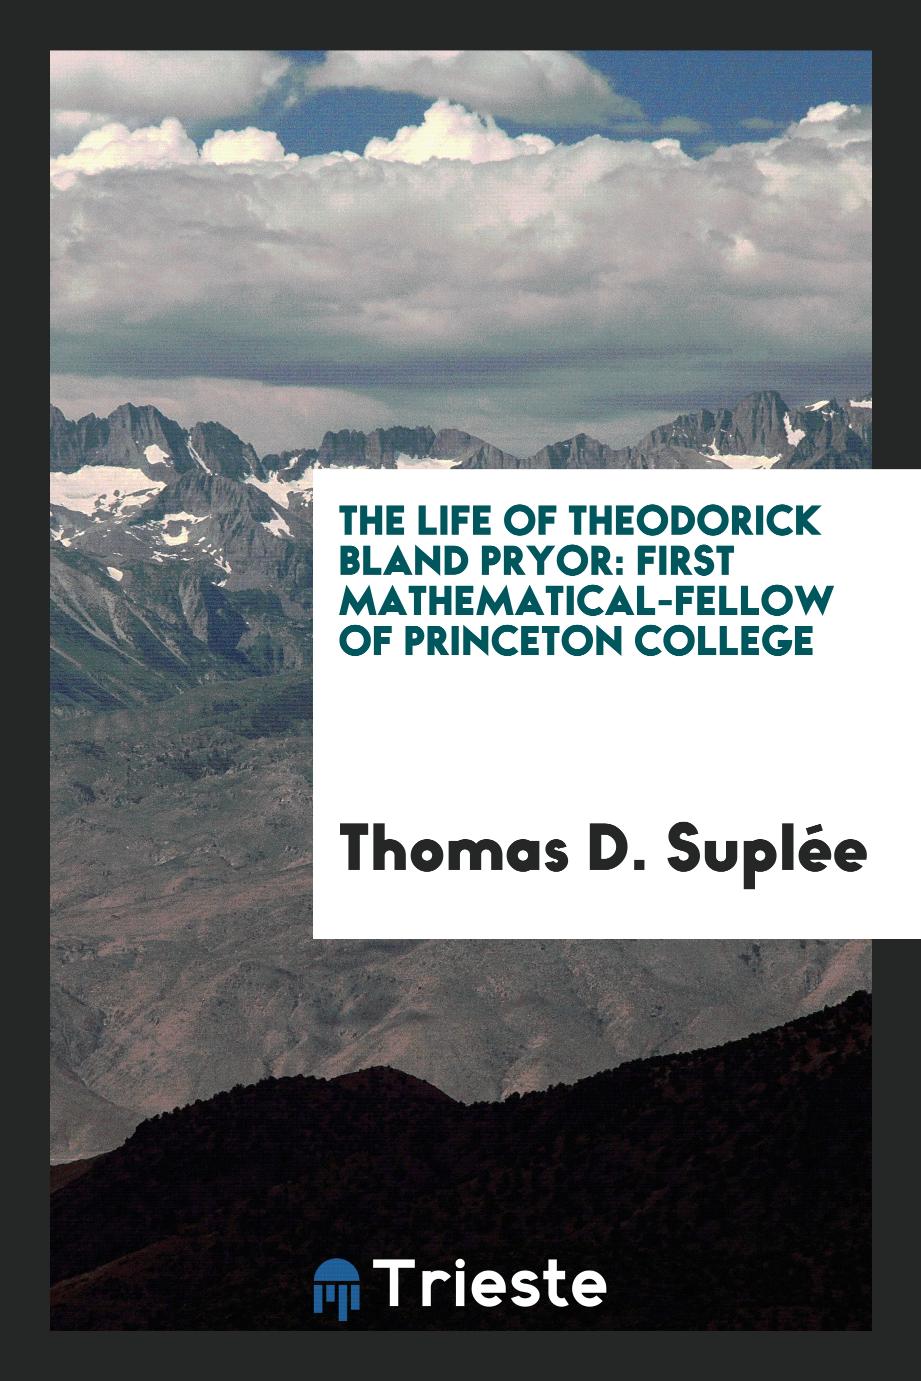 The Life of Theodorick Bland Pryor: First Mathematical-Fellow of Princeton College